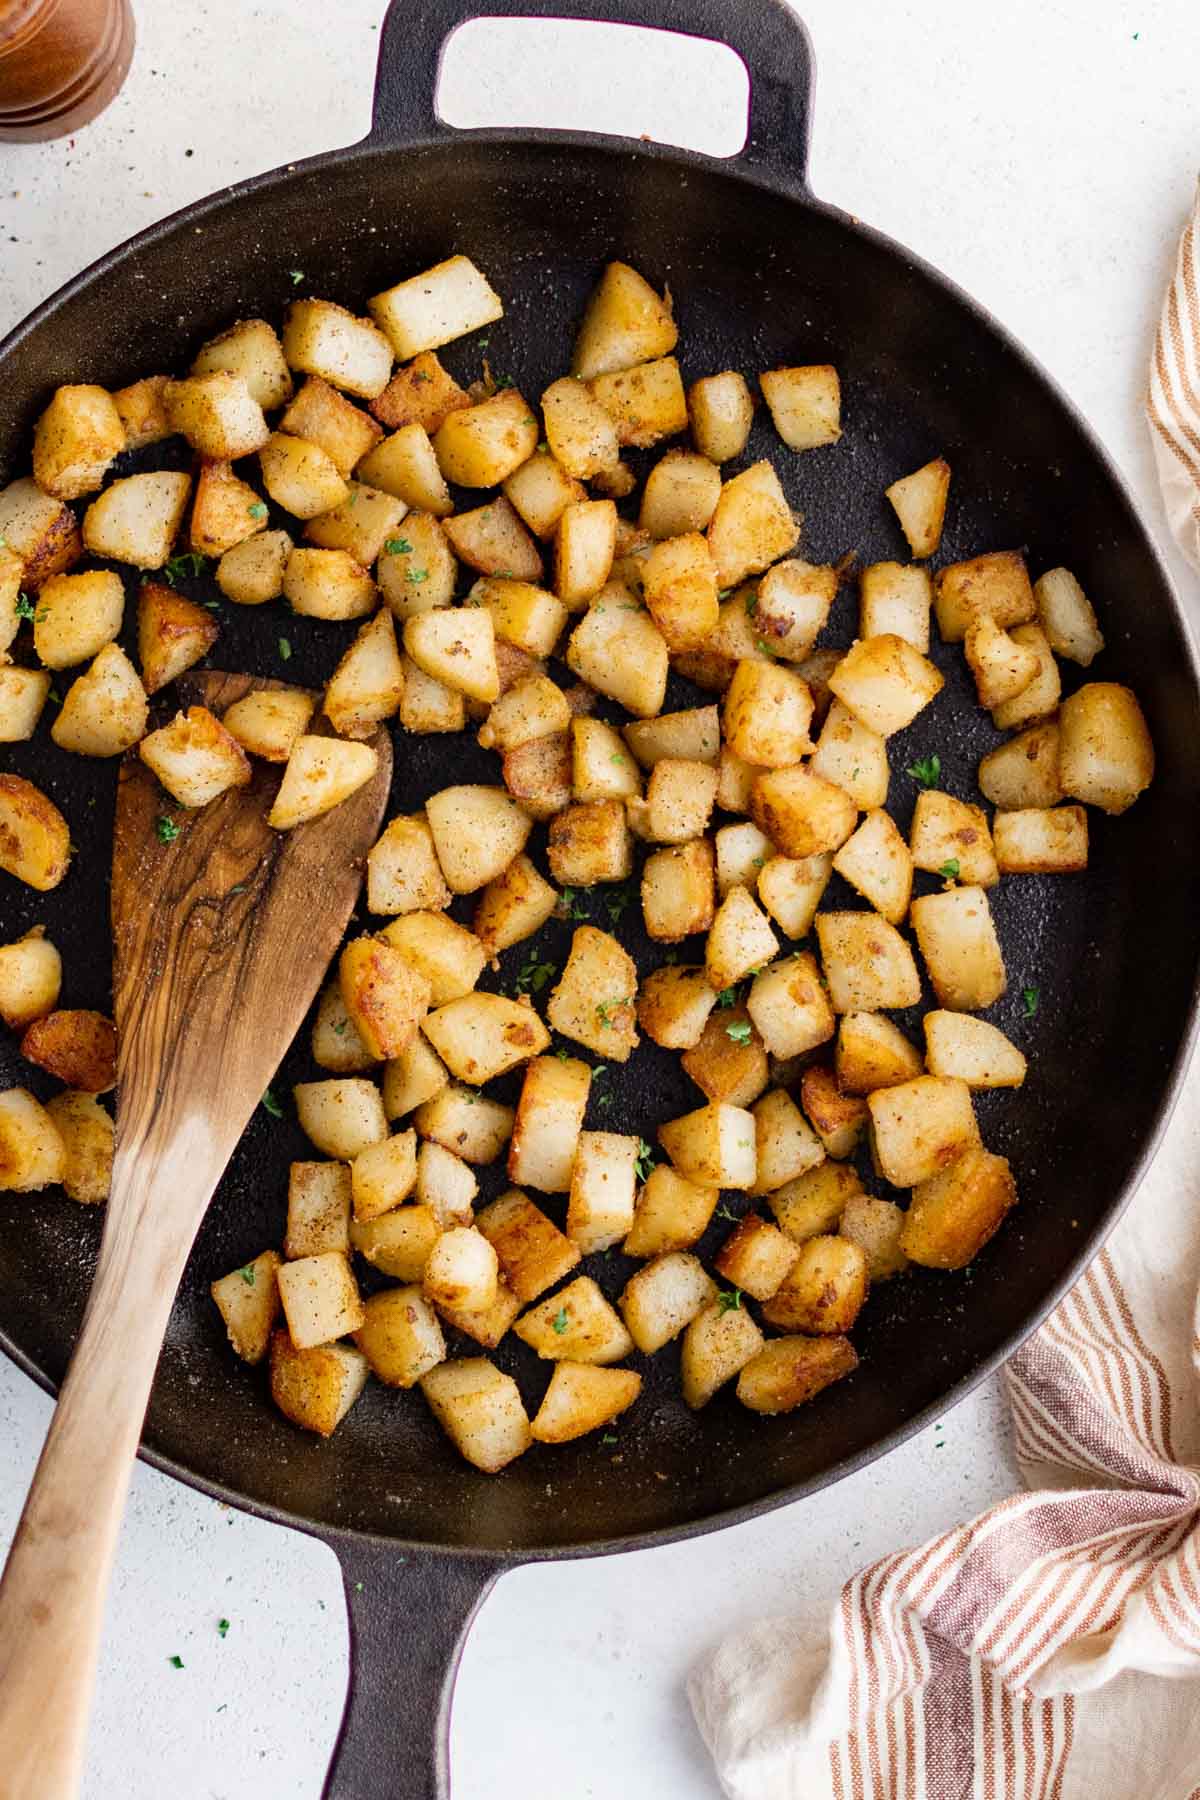 Cast iron skillet with diced crispy potatoes and a wooden spoon.